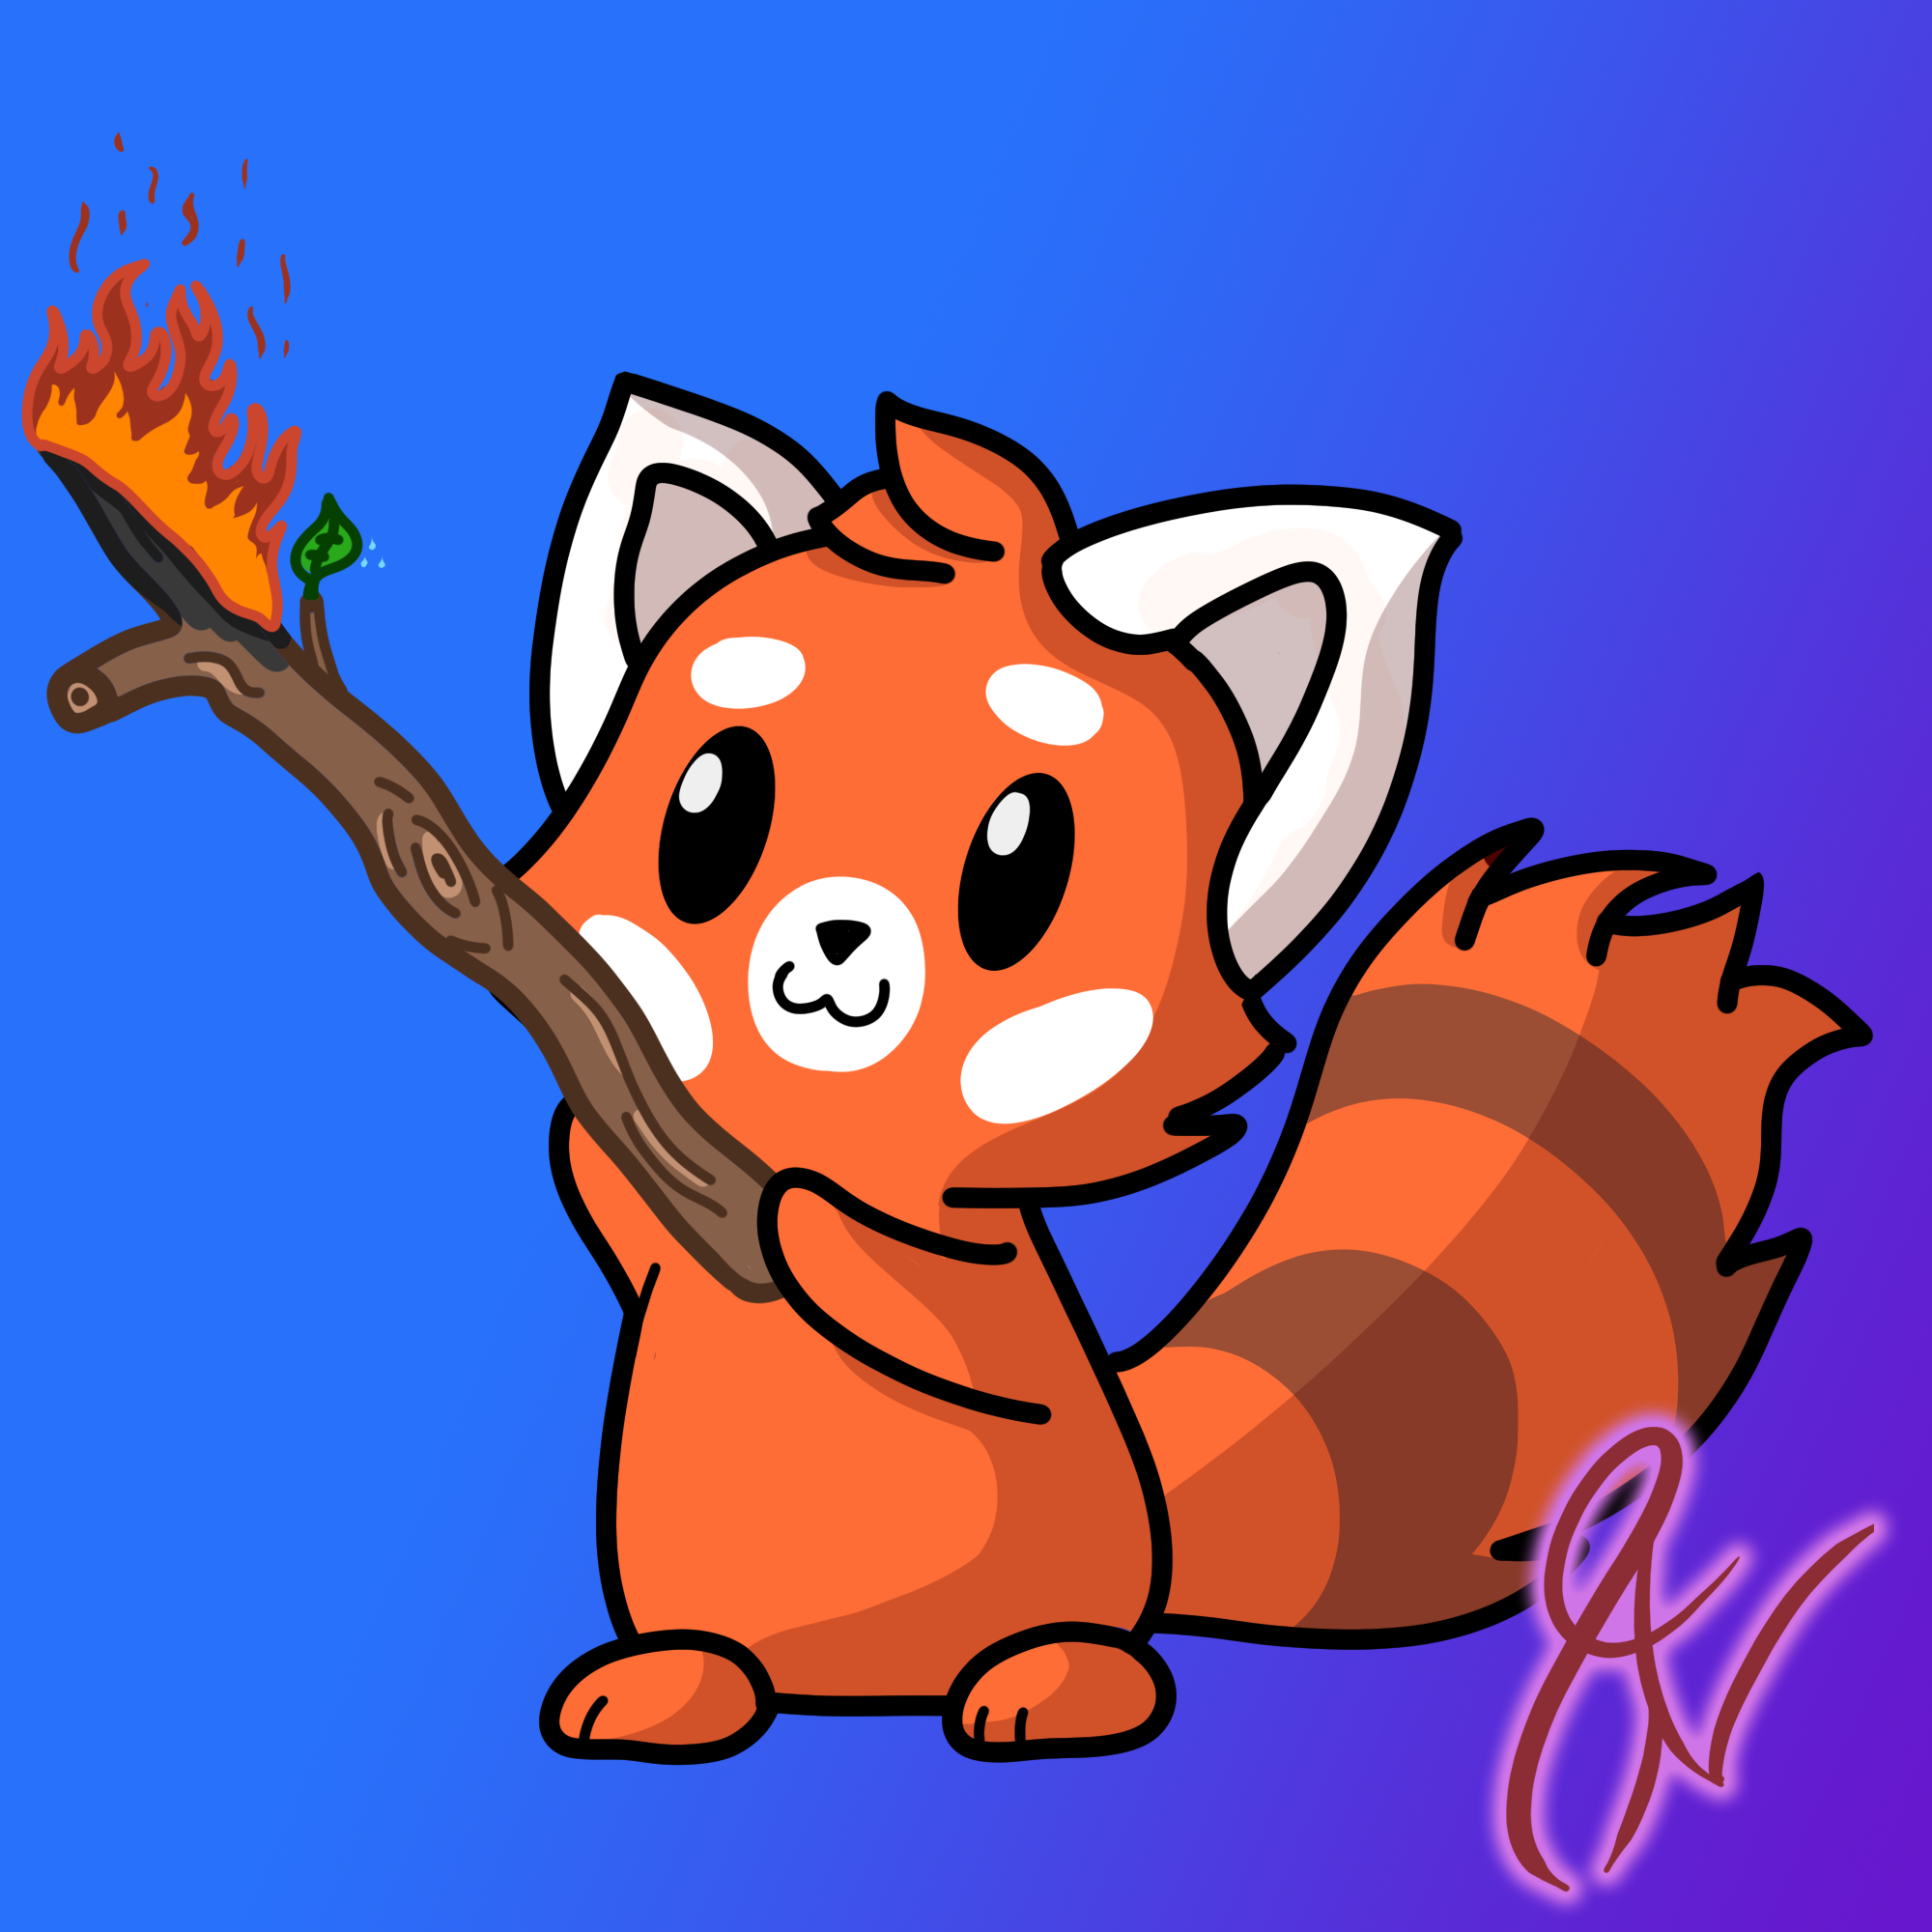 Red pandas probably roast marshmallows like this